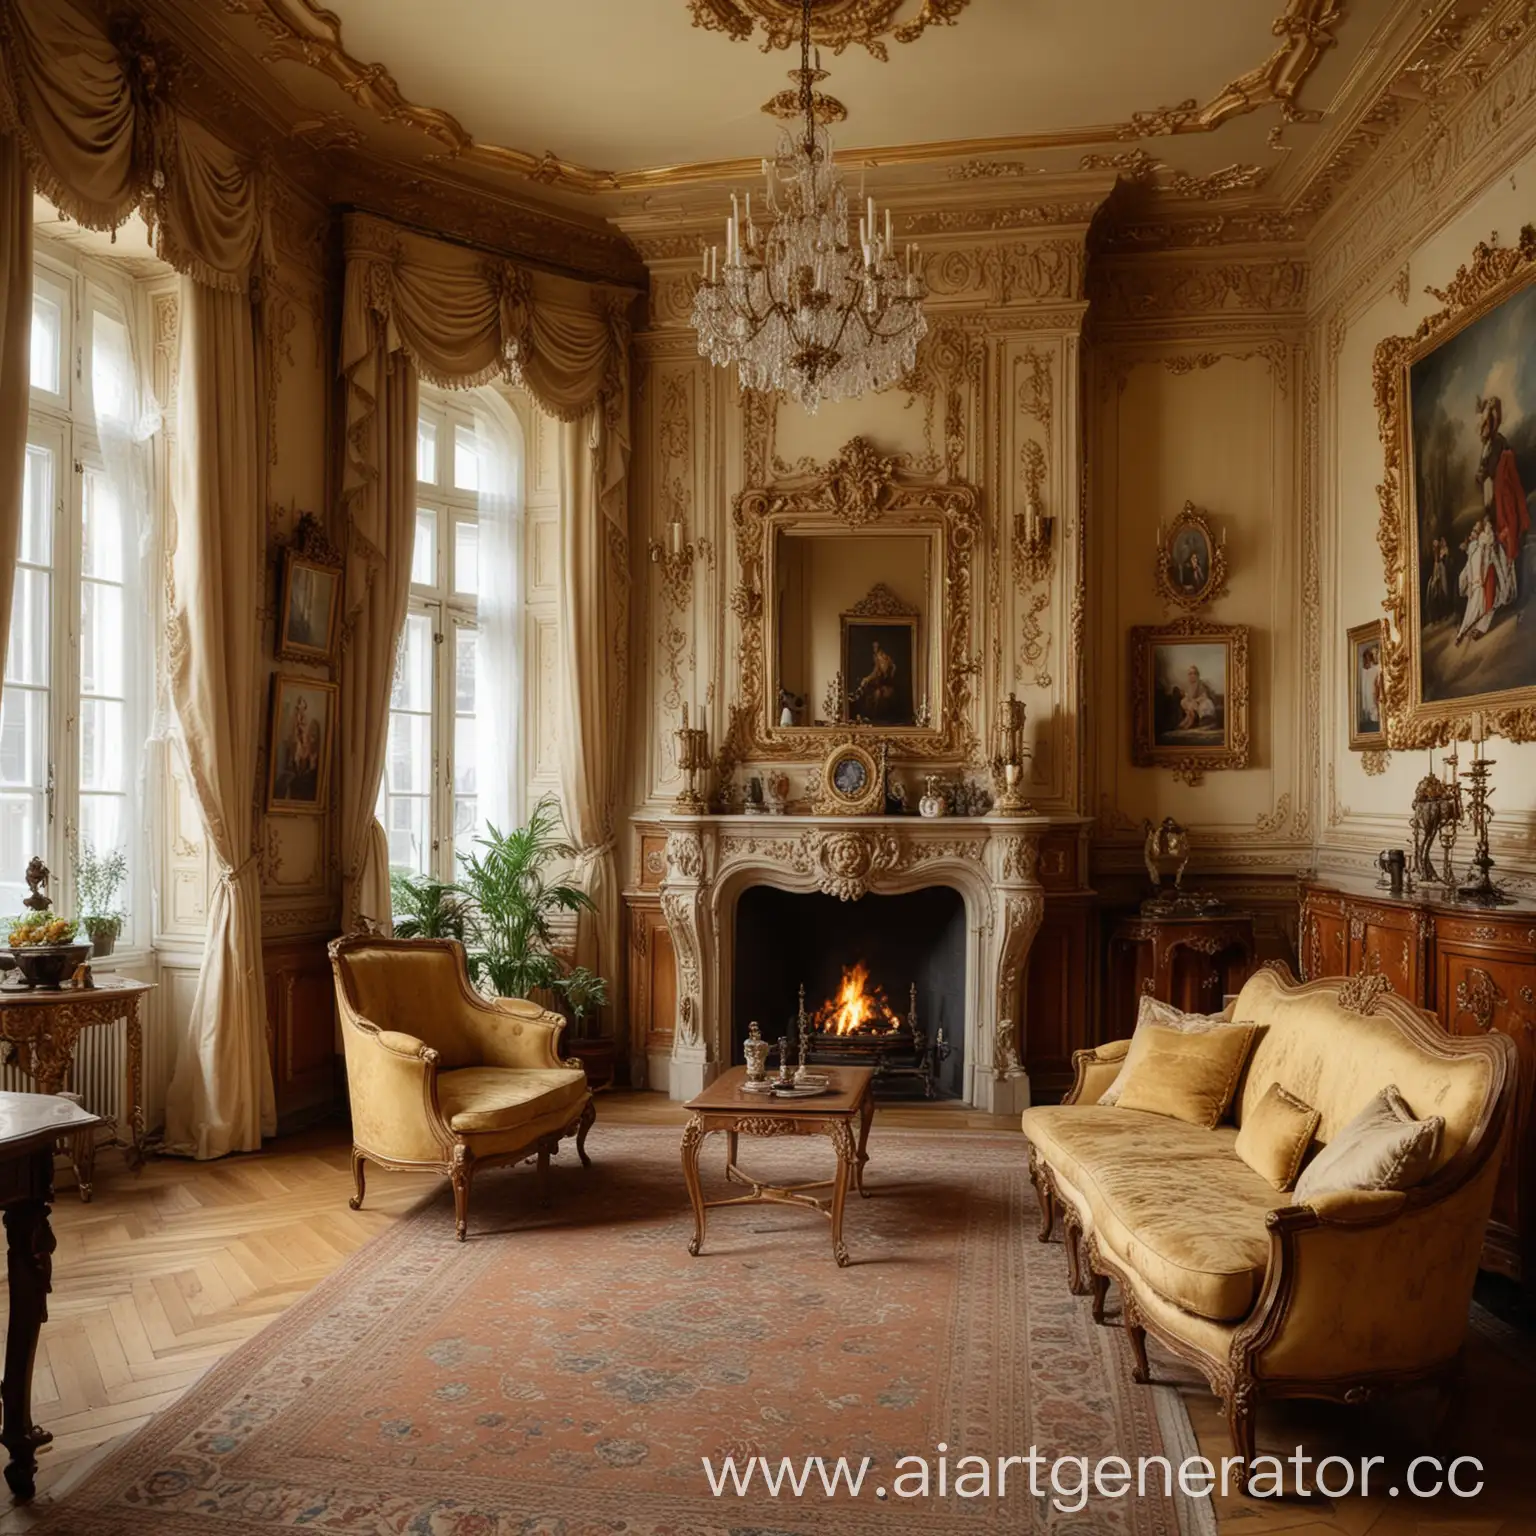 Opulent-19th-Century-Petersburg-Apartment-with-Ornate-Decor-and-Gold-Trunk